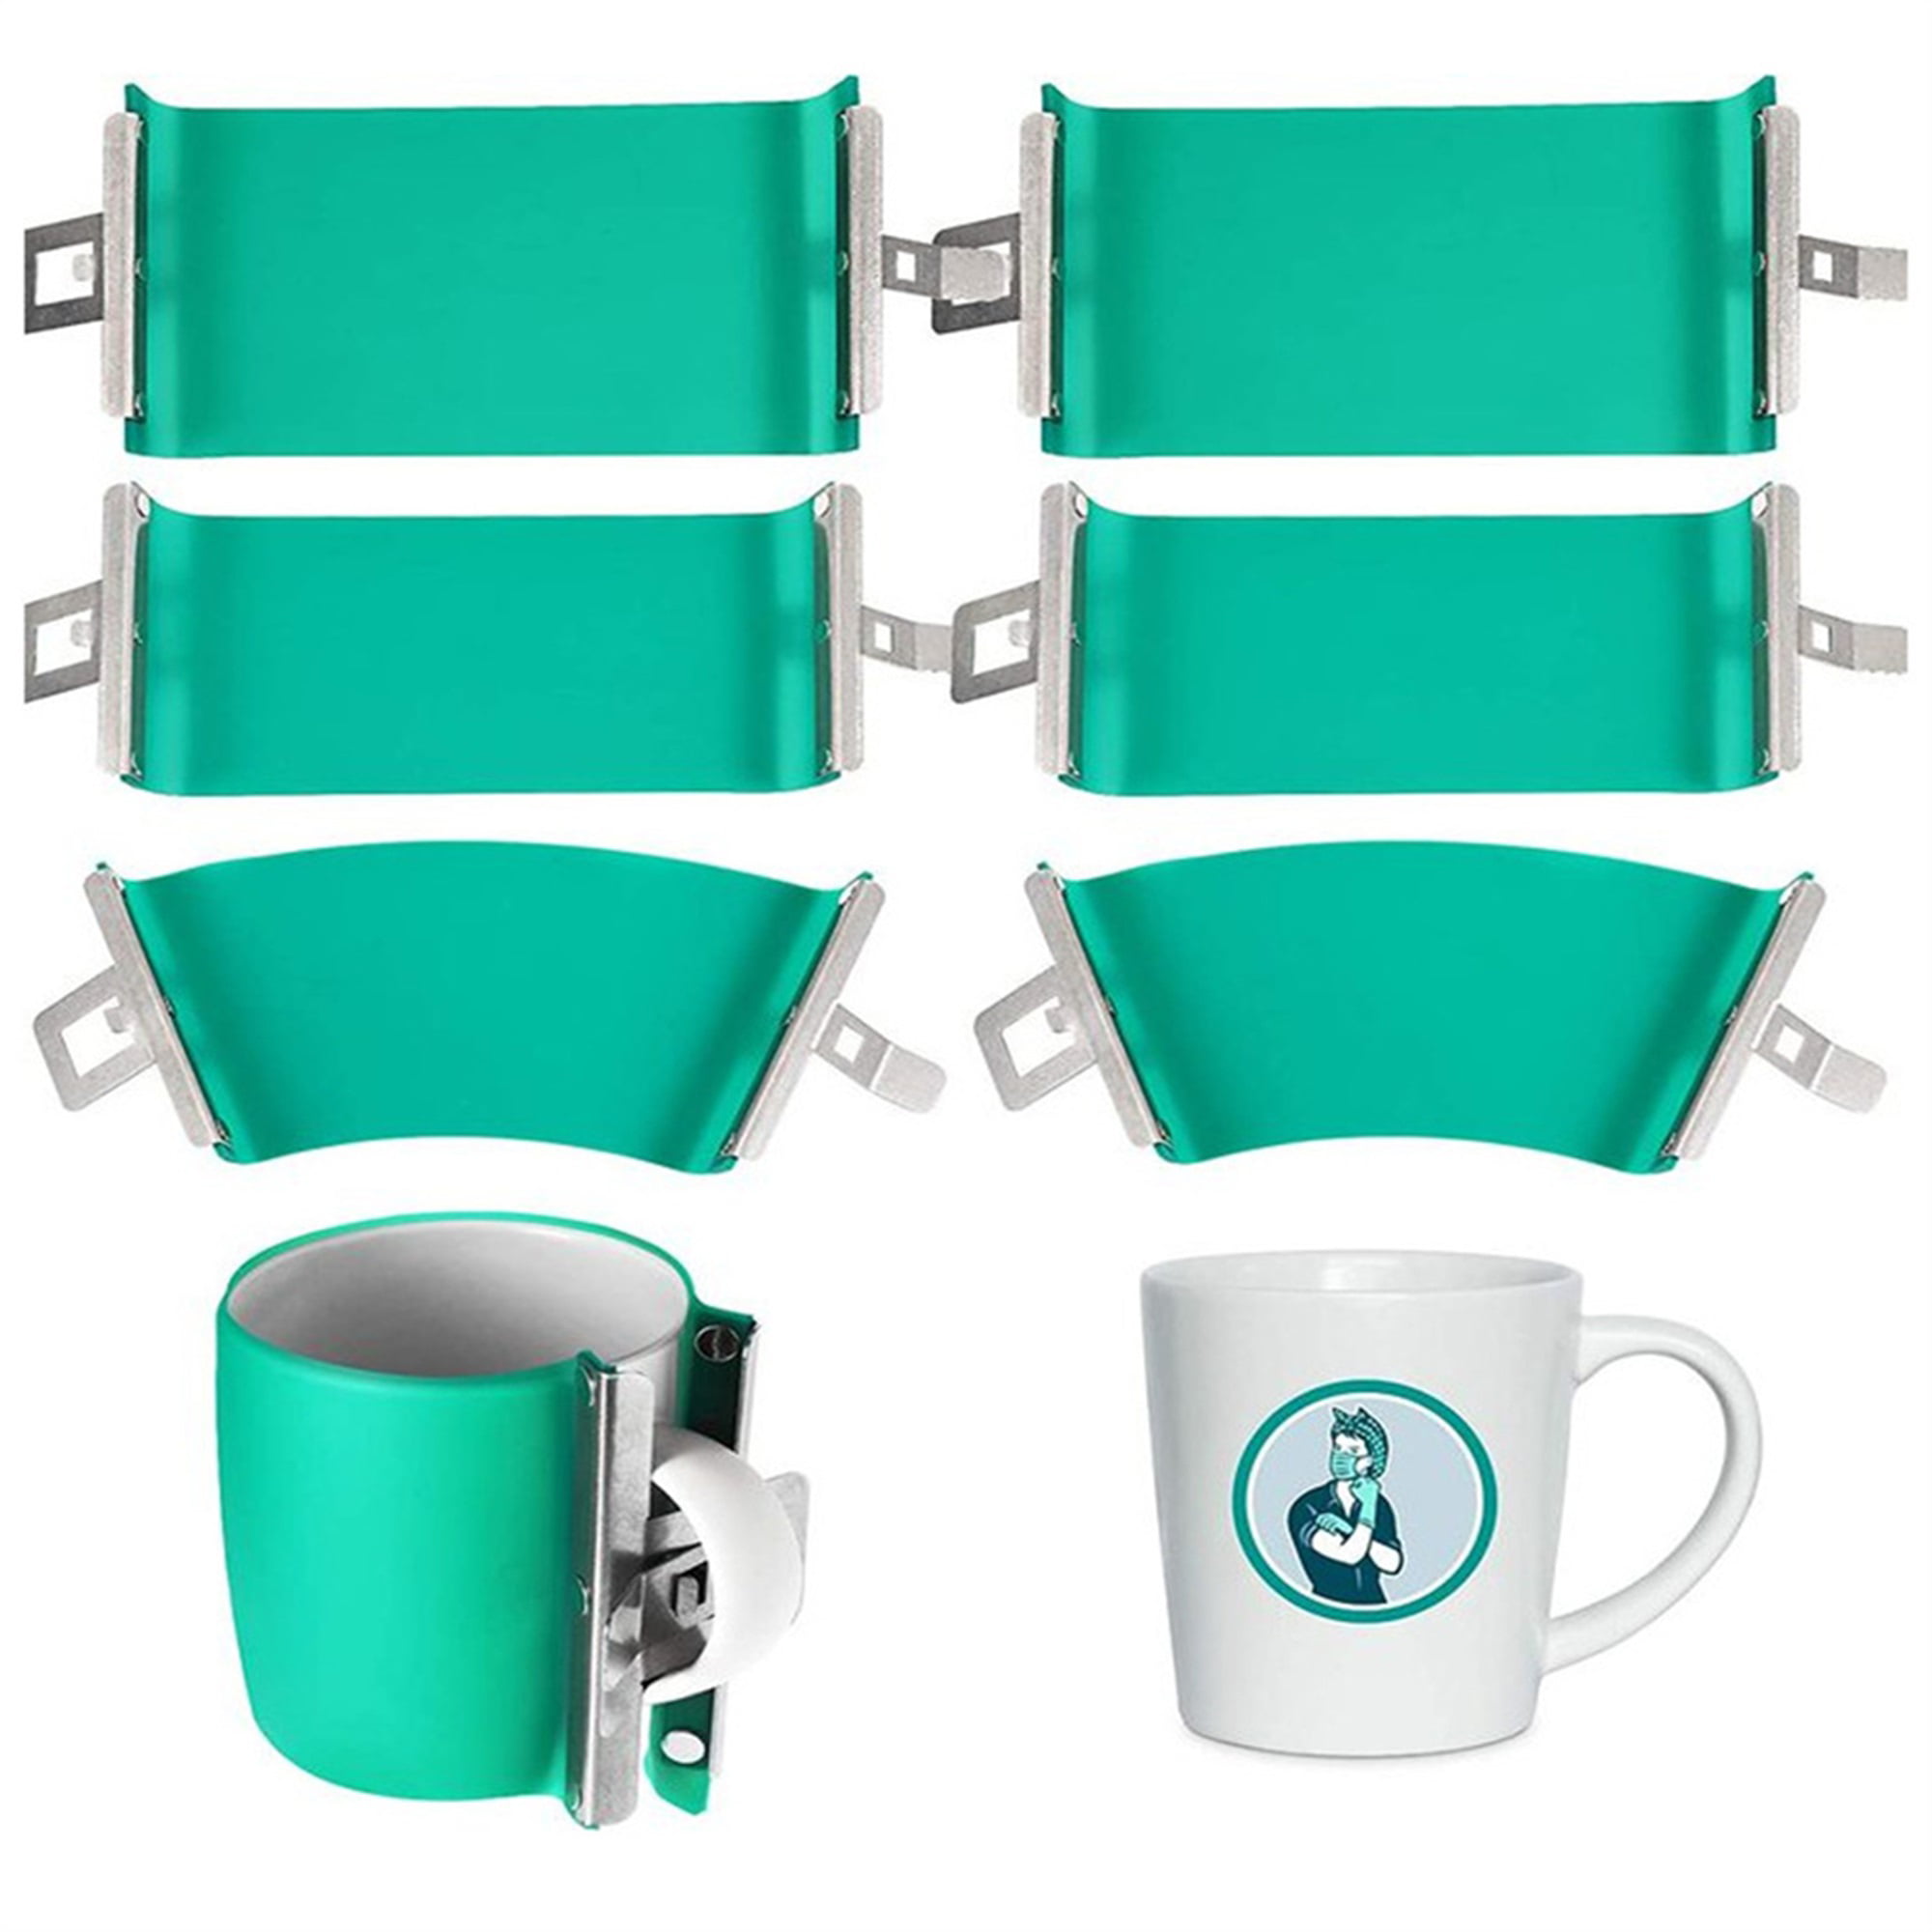 LCK Portable Cup Folding Silicone Telescopic Collapsible Coffee Cup Foldable Silica Mug Travel,Light Green 